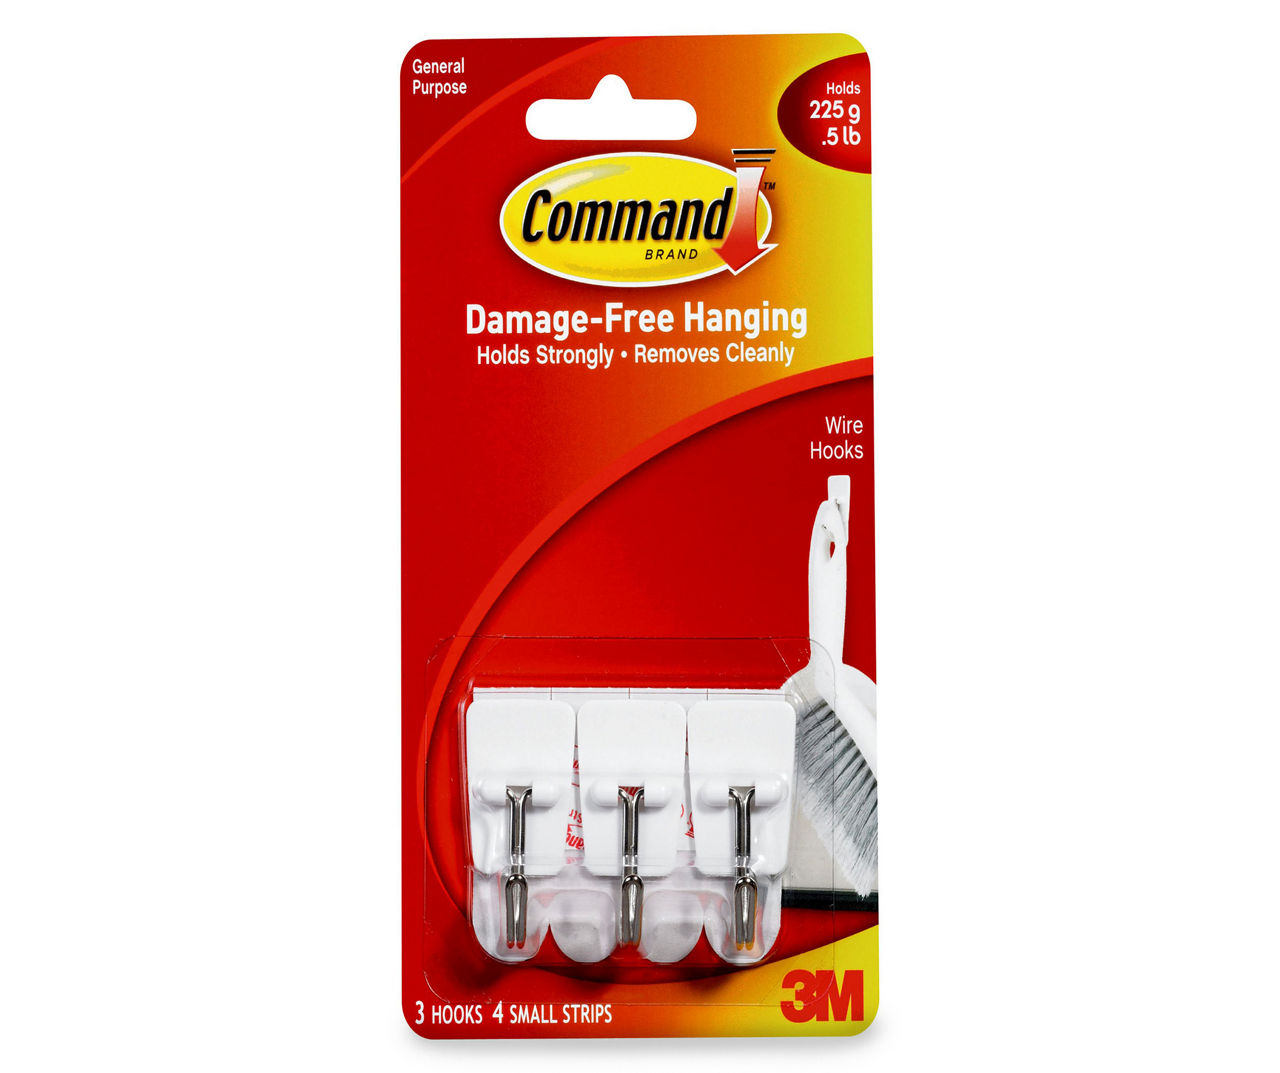 Command Round Cord Clips, Damage Free Hanging Cable Clips, No Tools Wall  Clips for Hanging Electrical Cables of Christmas Decorations, 13 Clear Cord